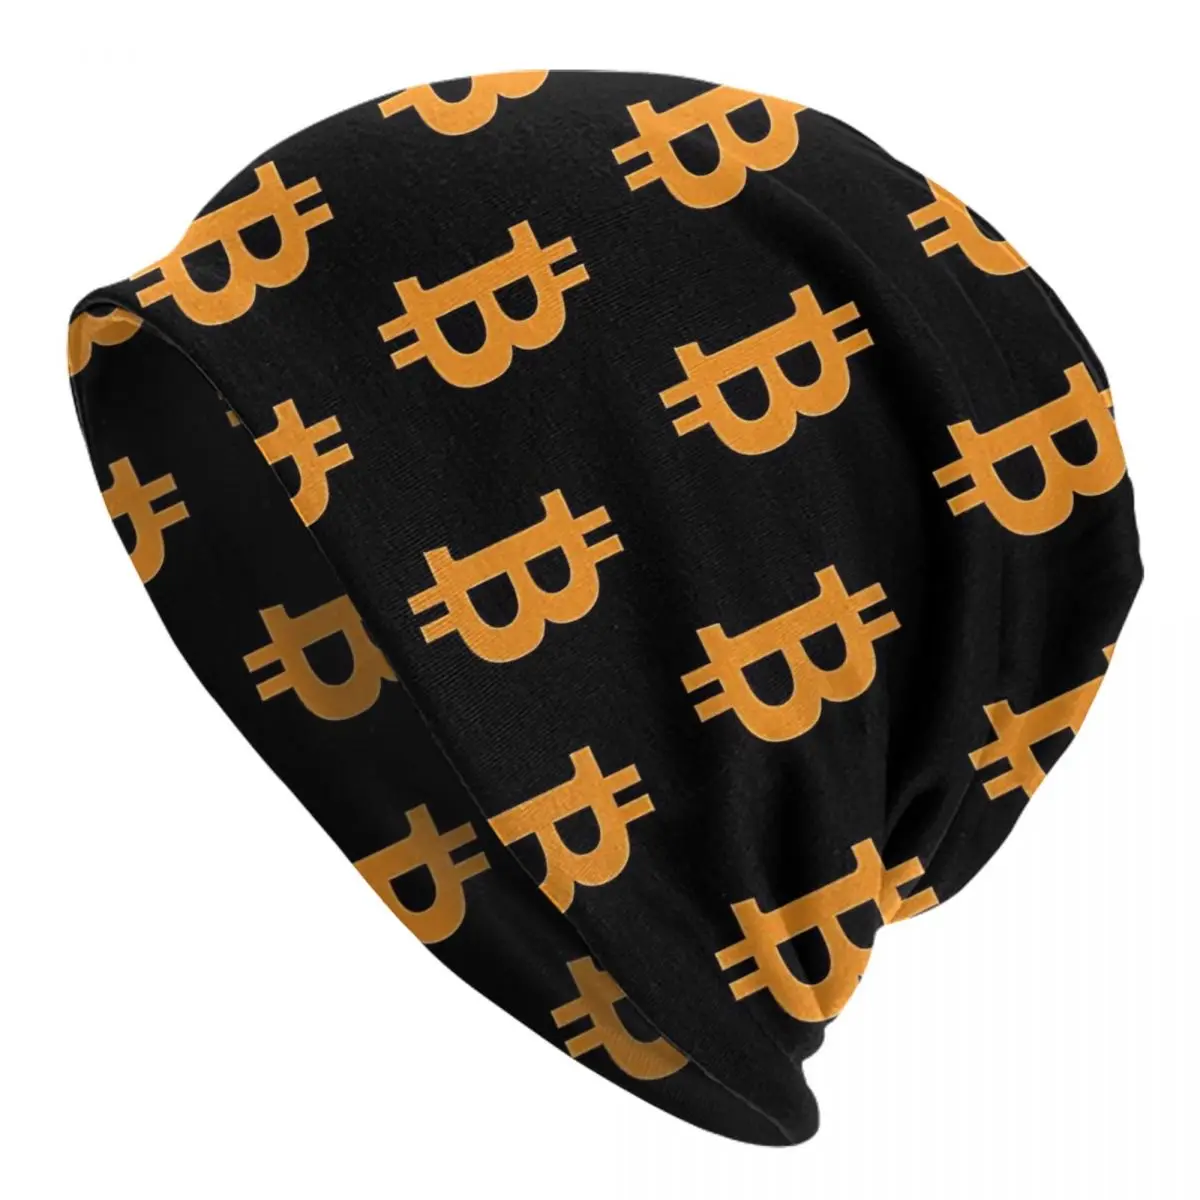 Bitcoin Cryptocurrency - Bitcoin BTC Adult Men's Women's Knit Hat Keep warm winter Funny knitted hat